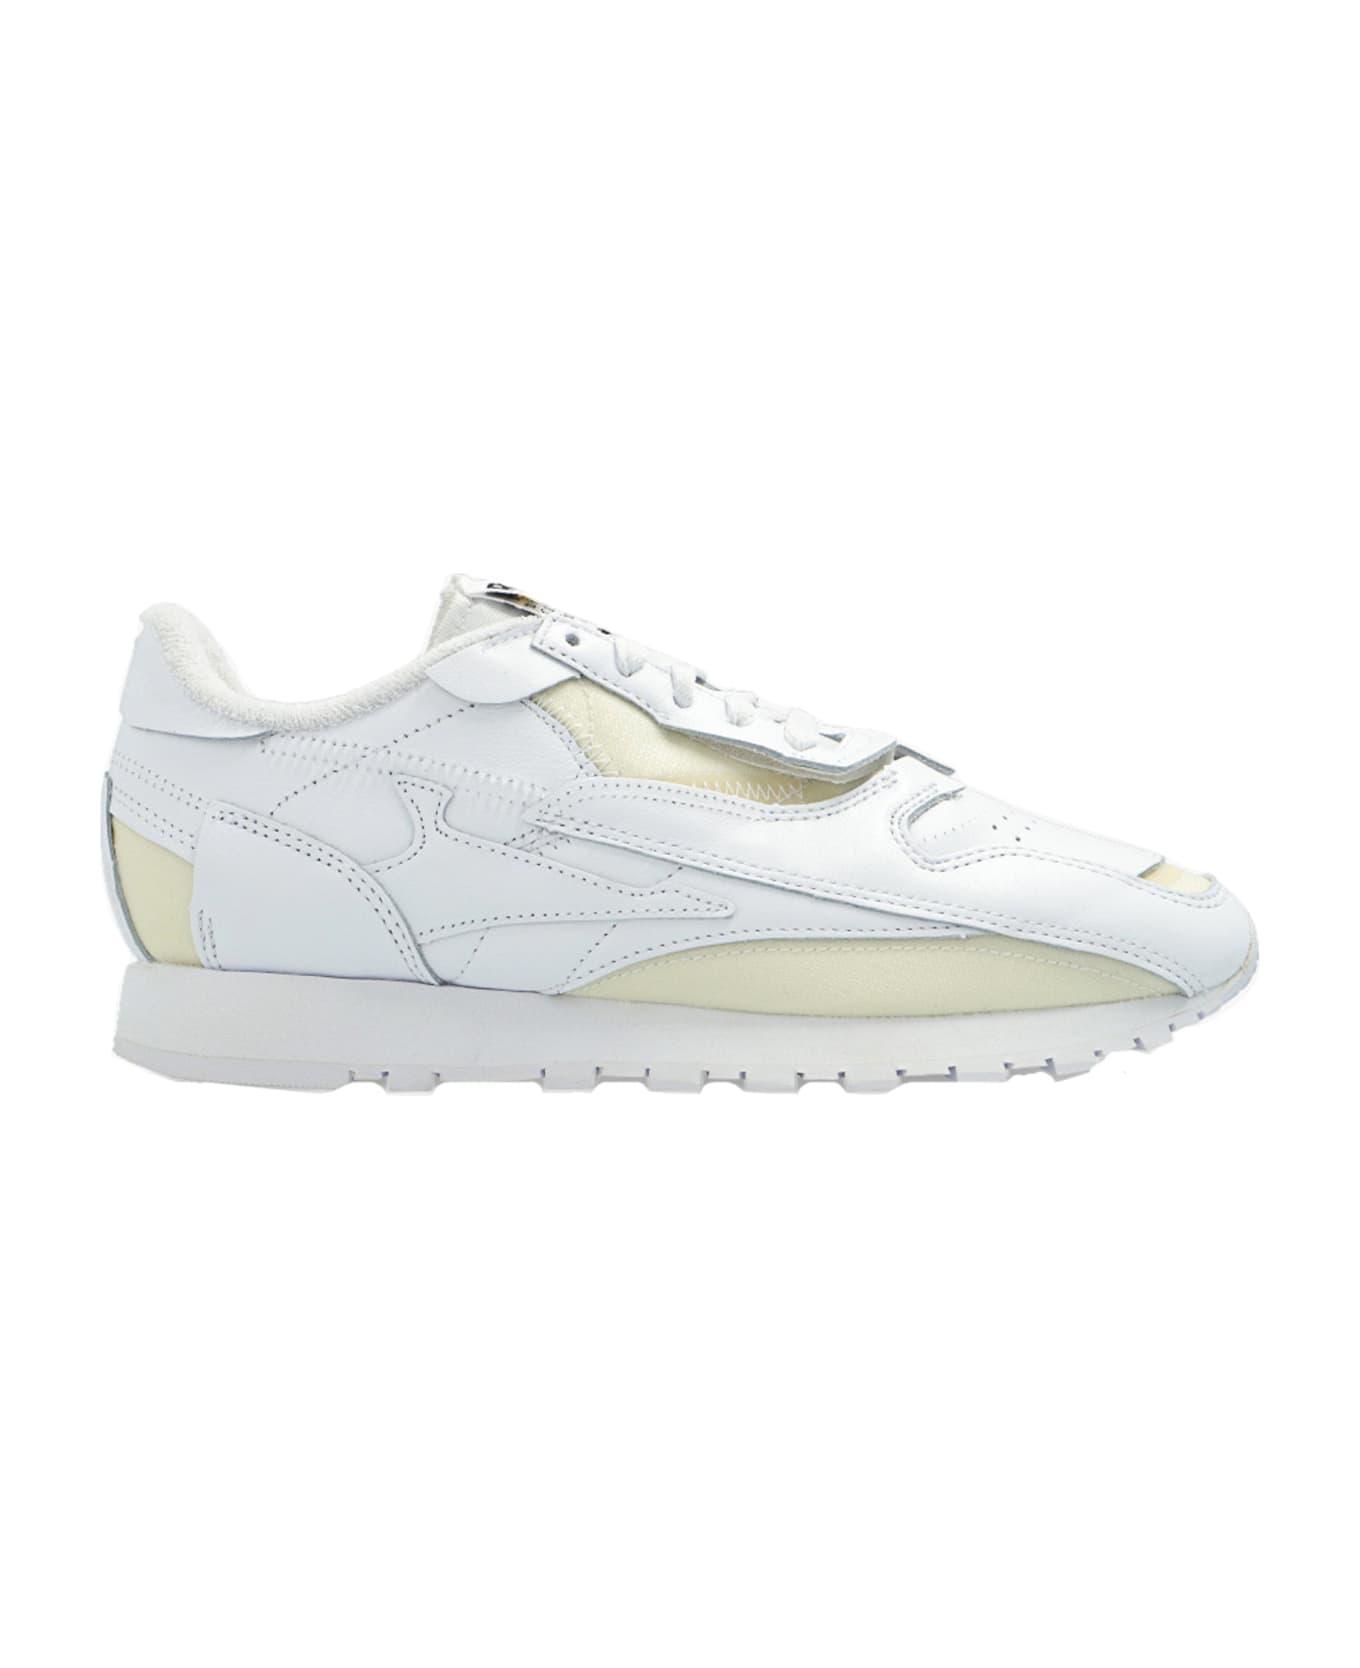 Maison Margiela Leather And Fabric Sneakers - White